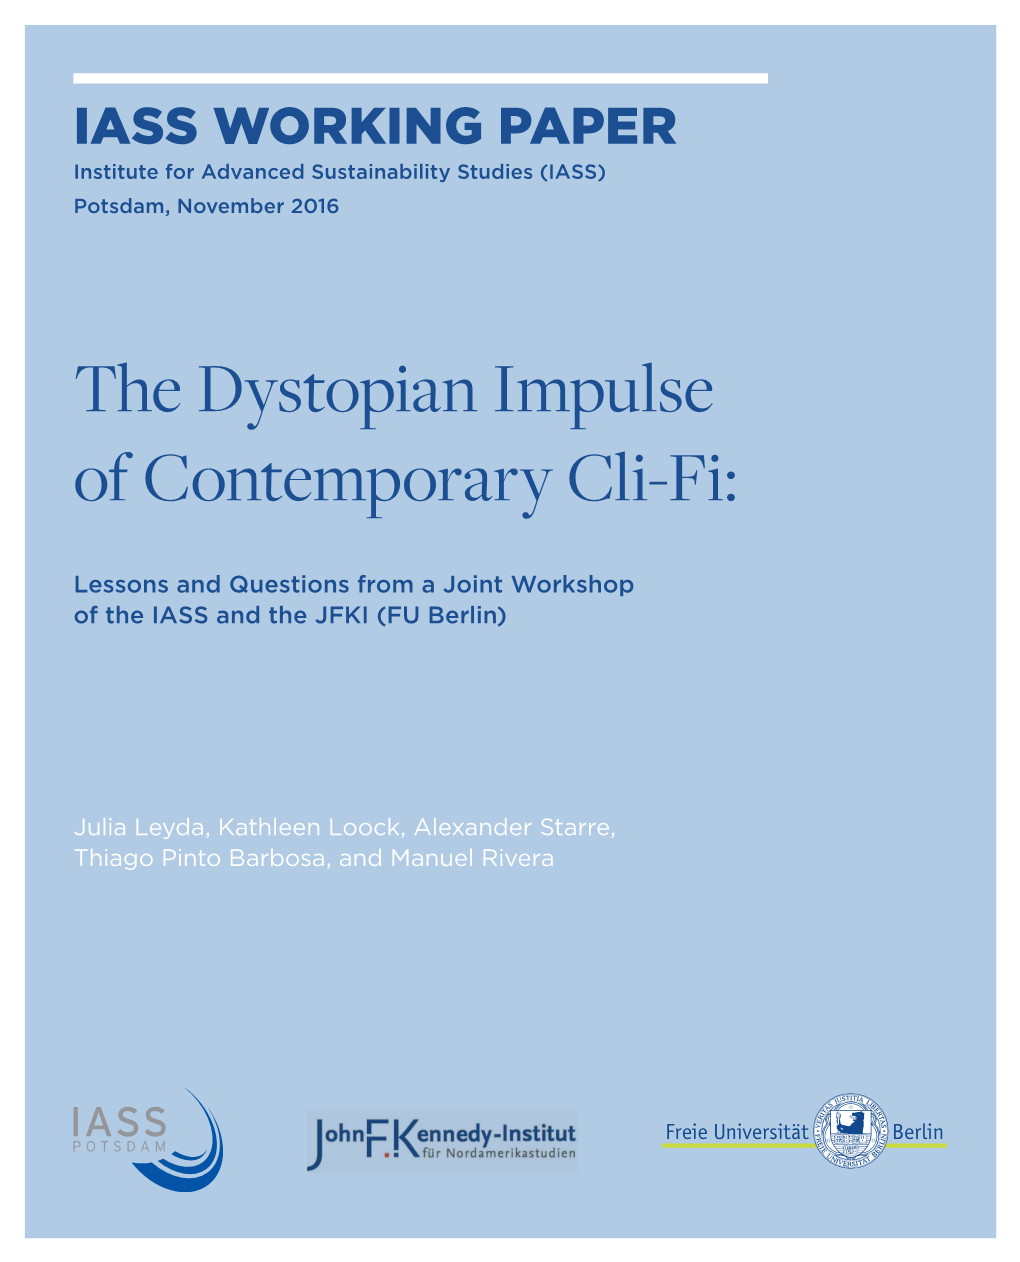 The Dystopian Impulse of Contemporary Cli-Fi: Lessons And